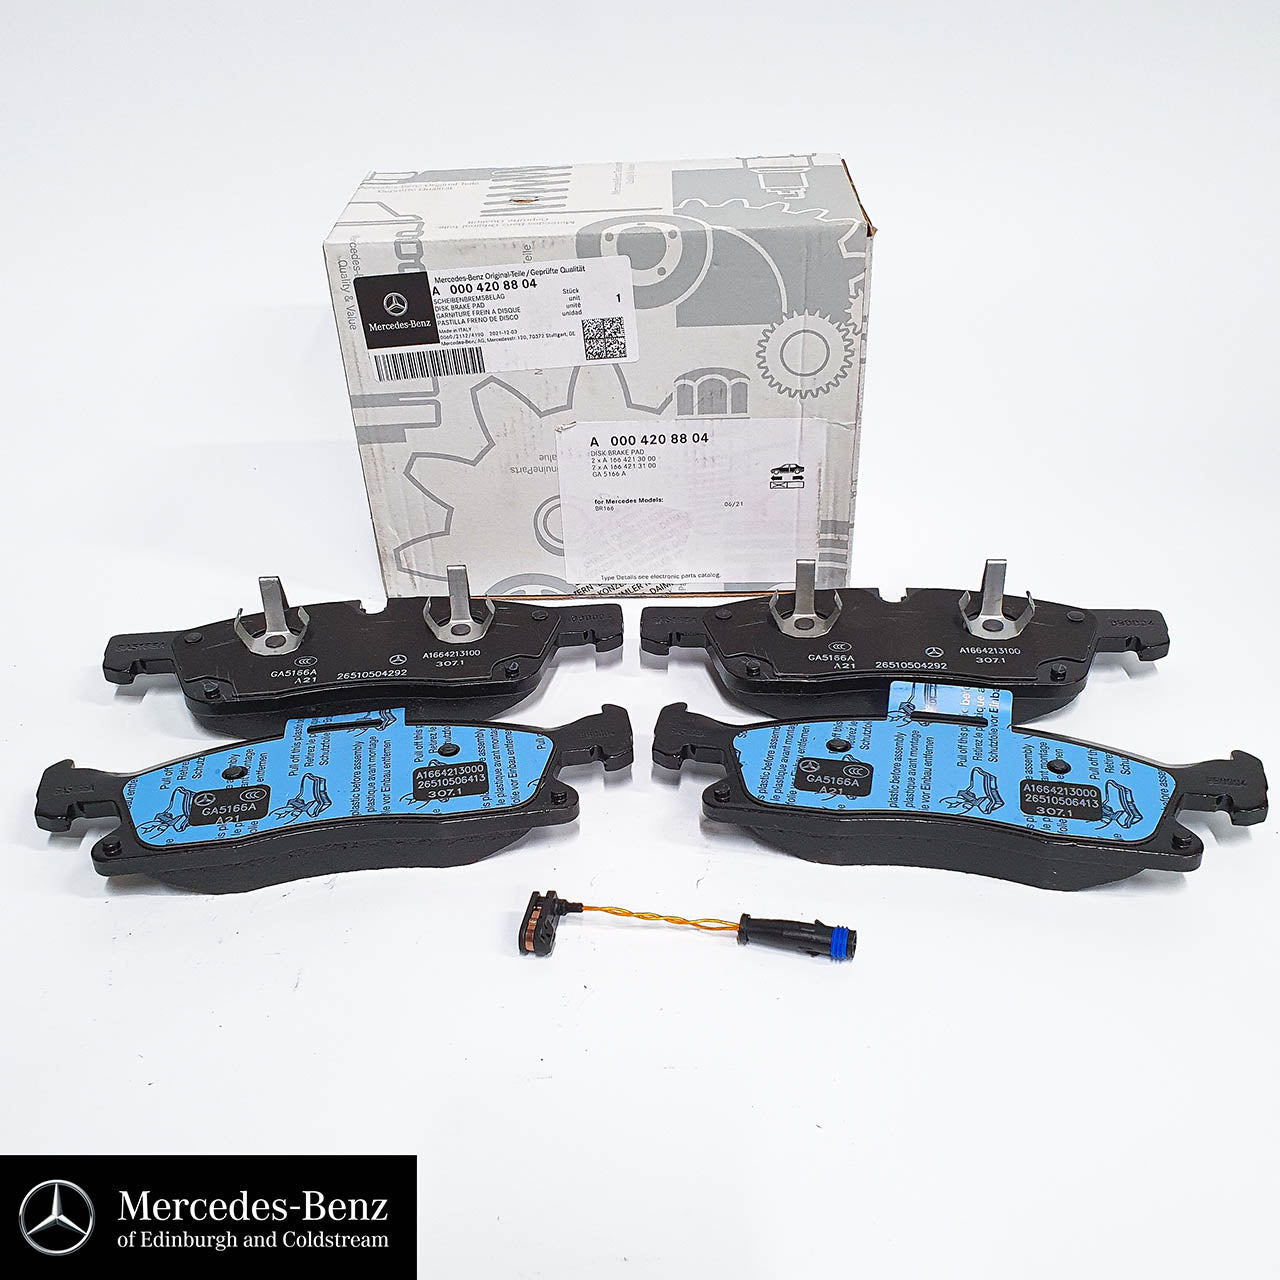 Genuine Mercedes-Benz Front Brake Pads ML GLE Mercedes 166 and 292 model series